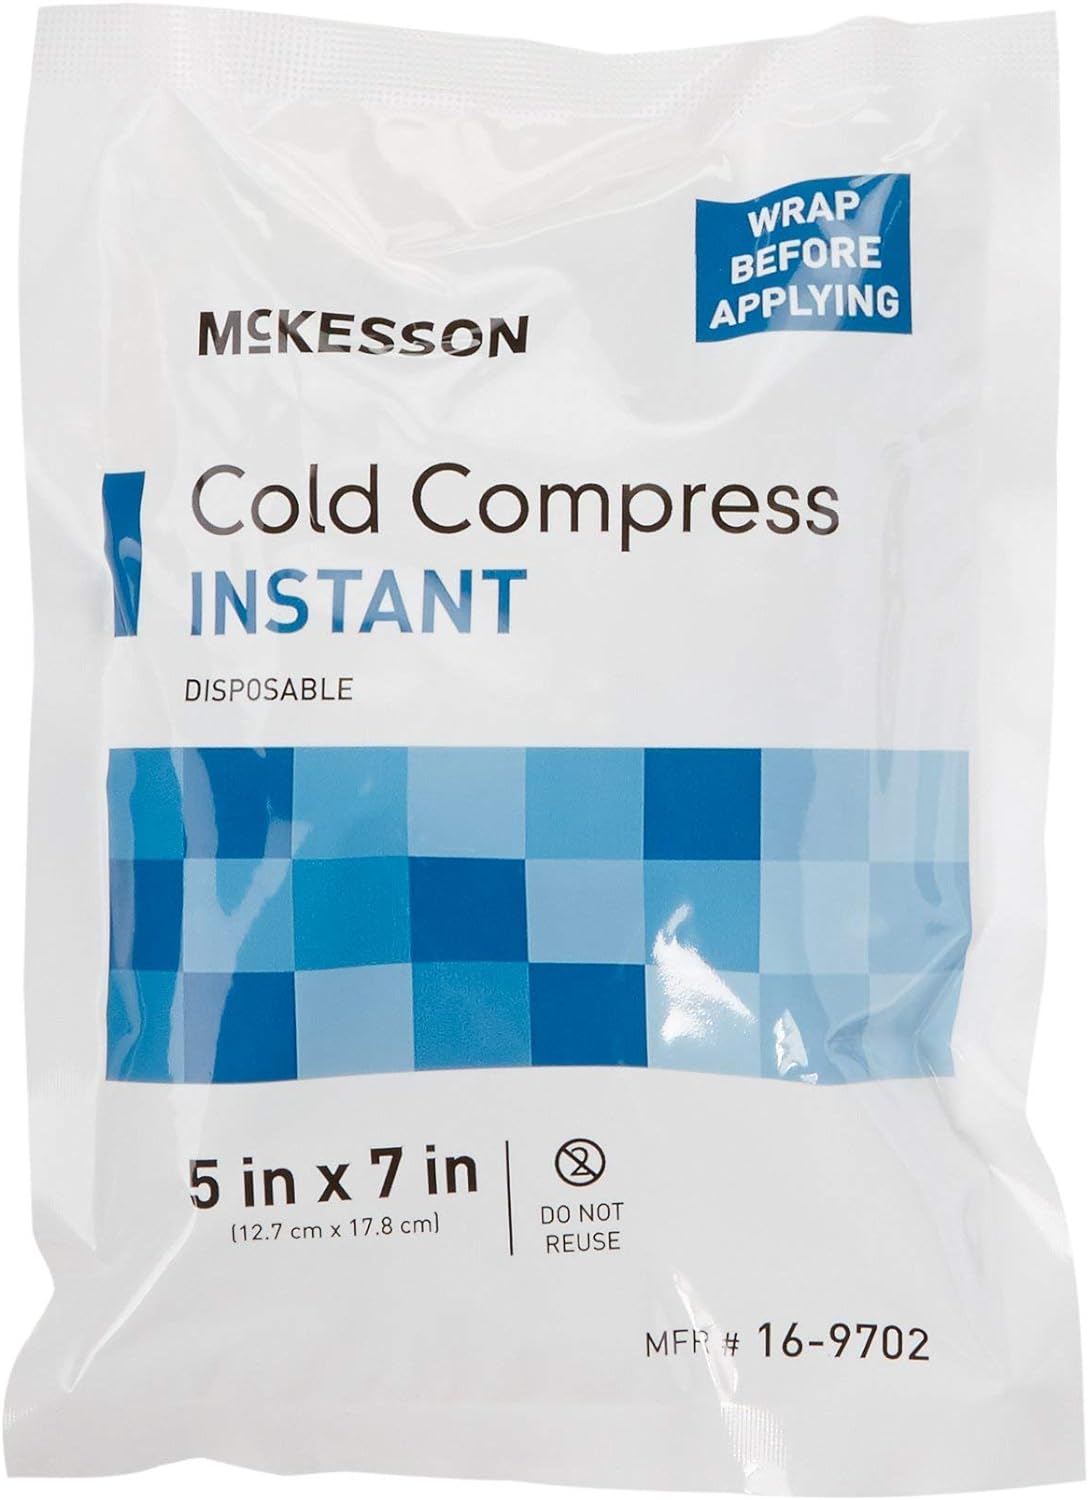 McKesson Cold Compress, Instant Cold Pack, Disposable, 5 in x 7 in, 1 Count, 24 Packs, 24 Total